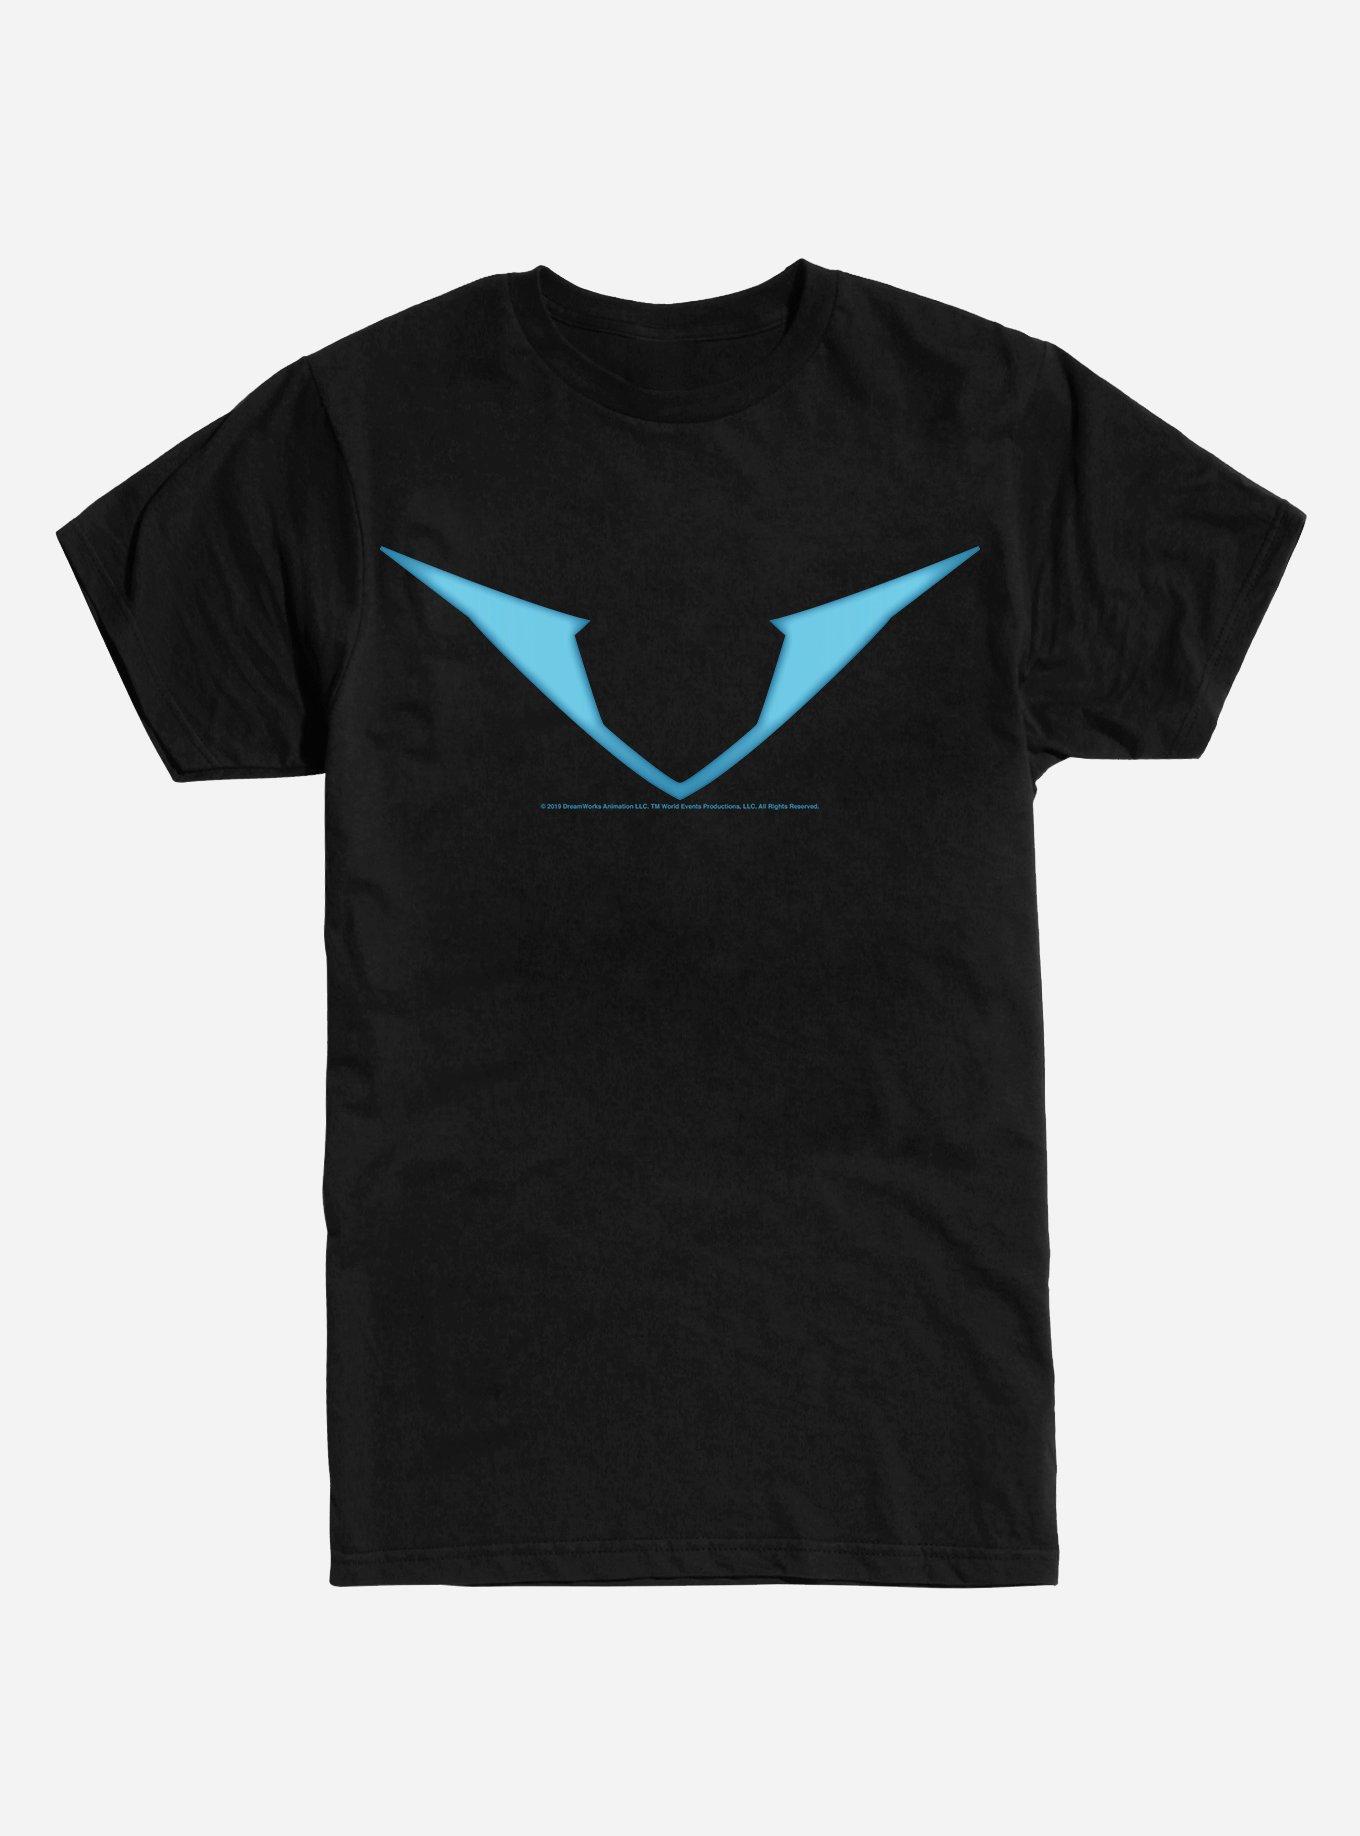 Create meme nike on a black background, t-shirt roblox nike, the get t shirt  nike - Pictures 